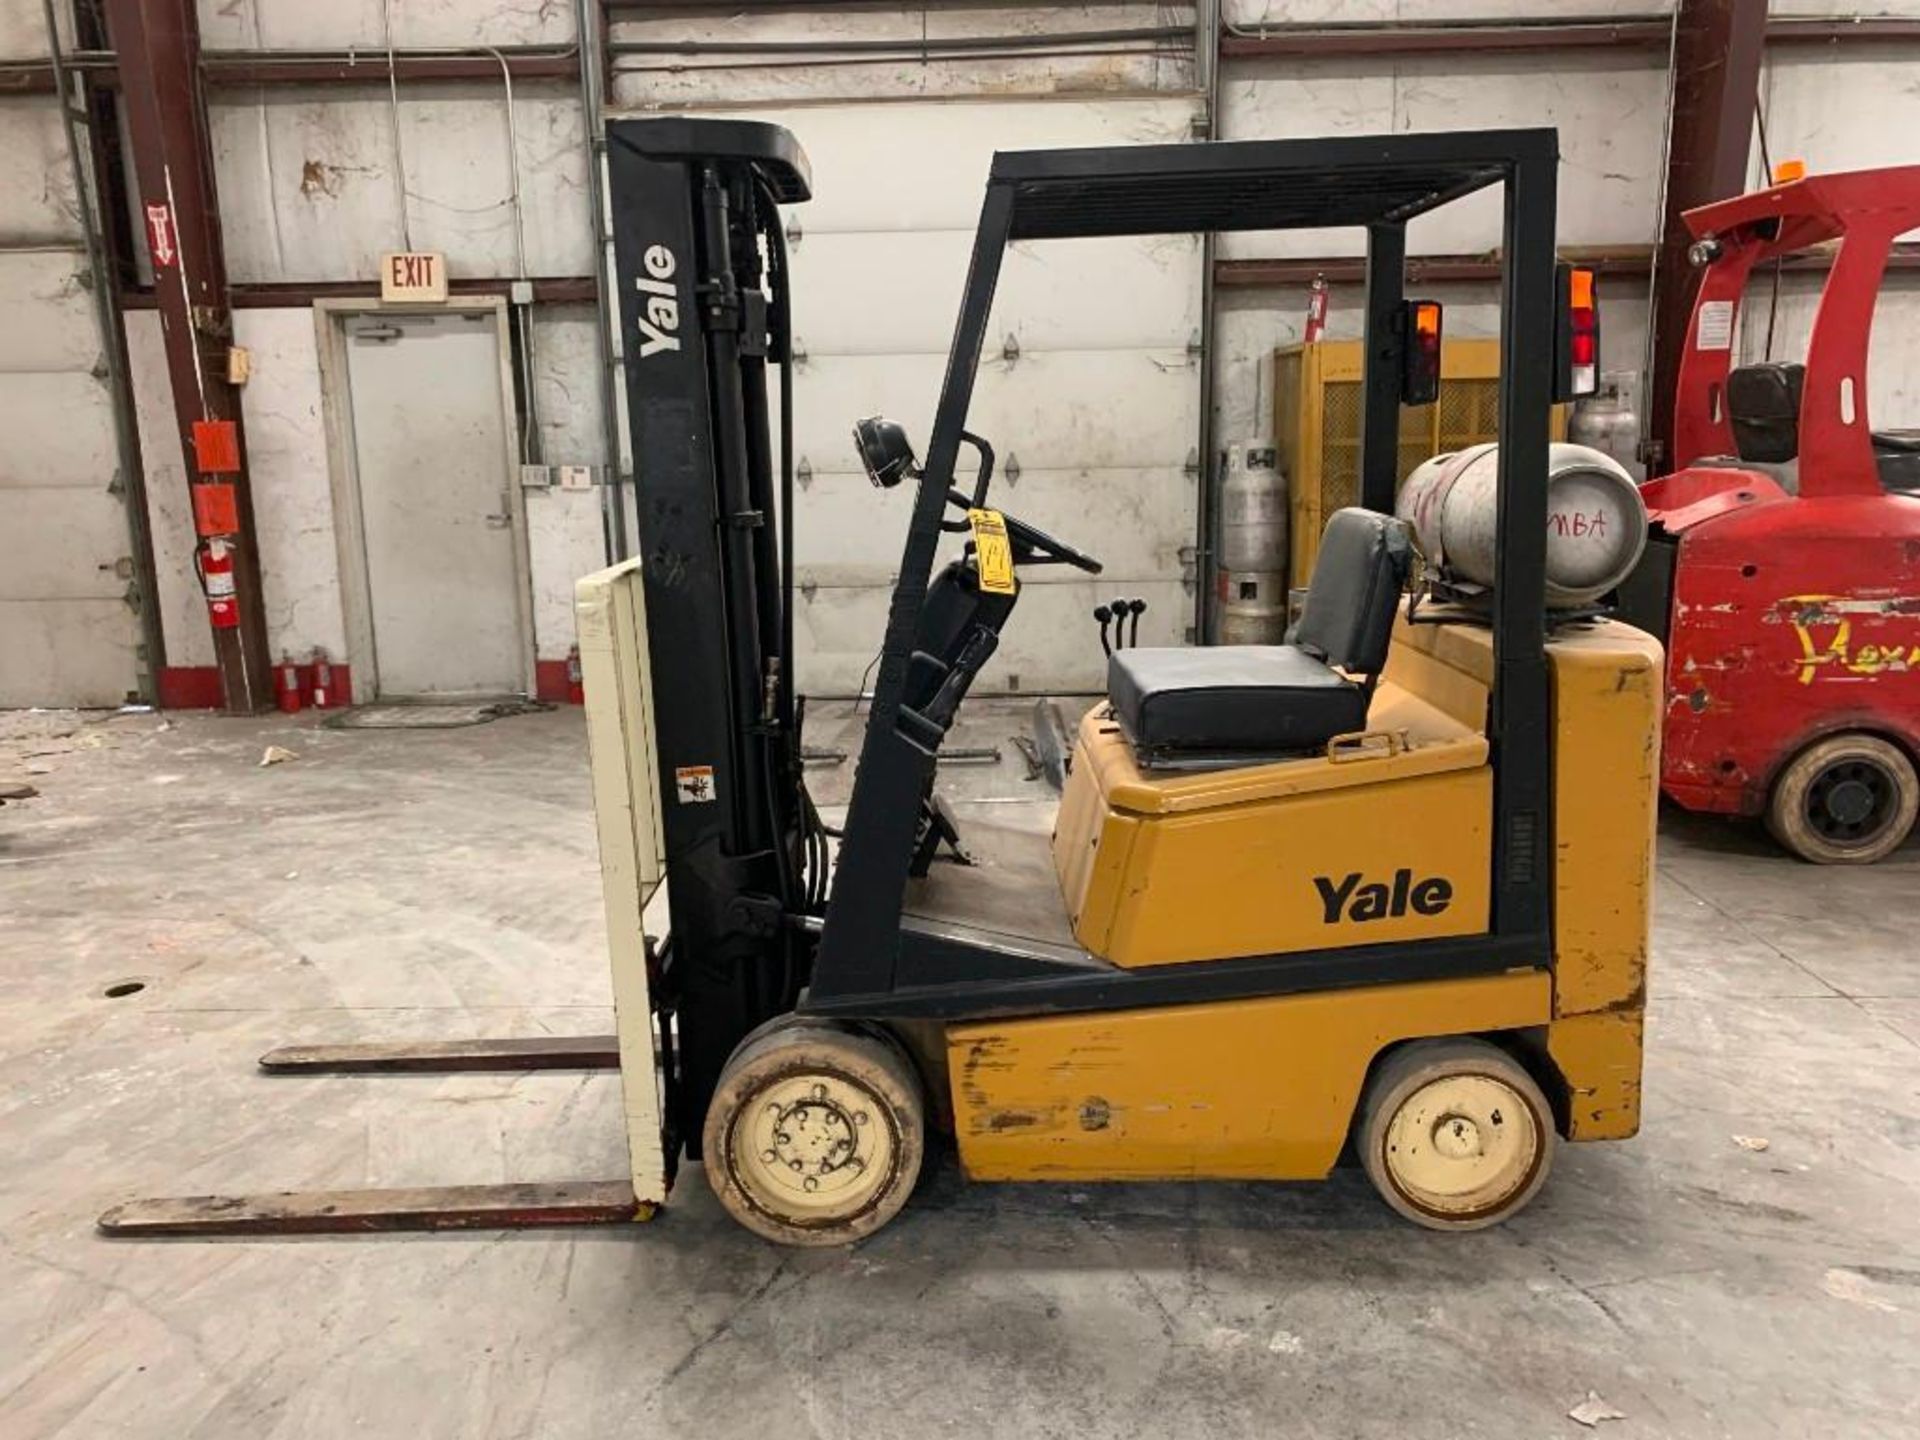 YALE 4,000 LB. CAPACITY FORKLIFT, MODEL GLC040, S/N N593043, LPG, SOLID NON-MARKING TIRES, 3-STAGE M